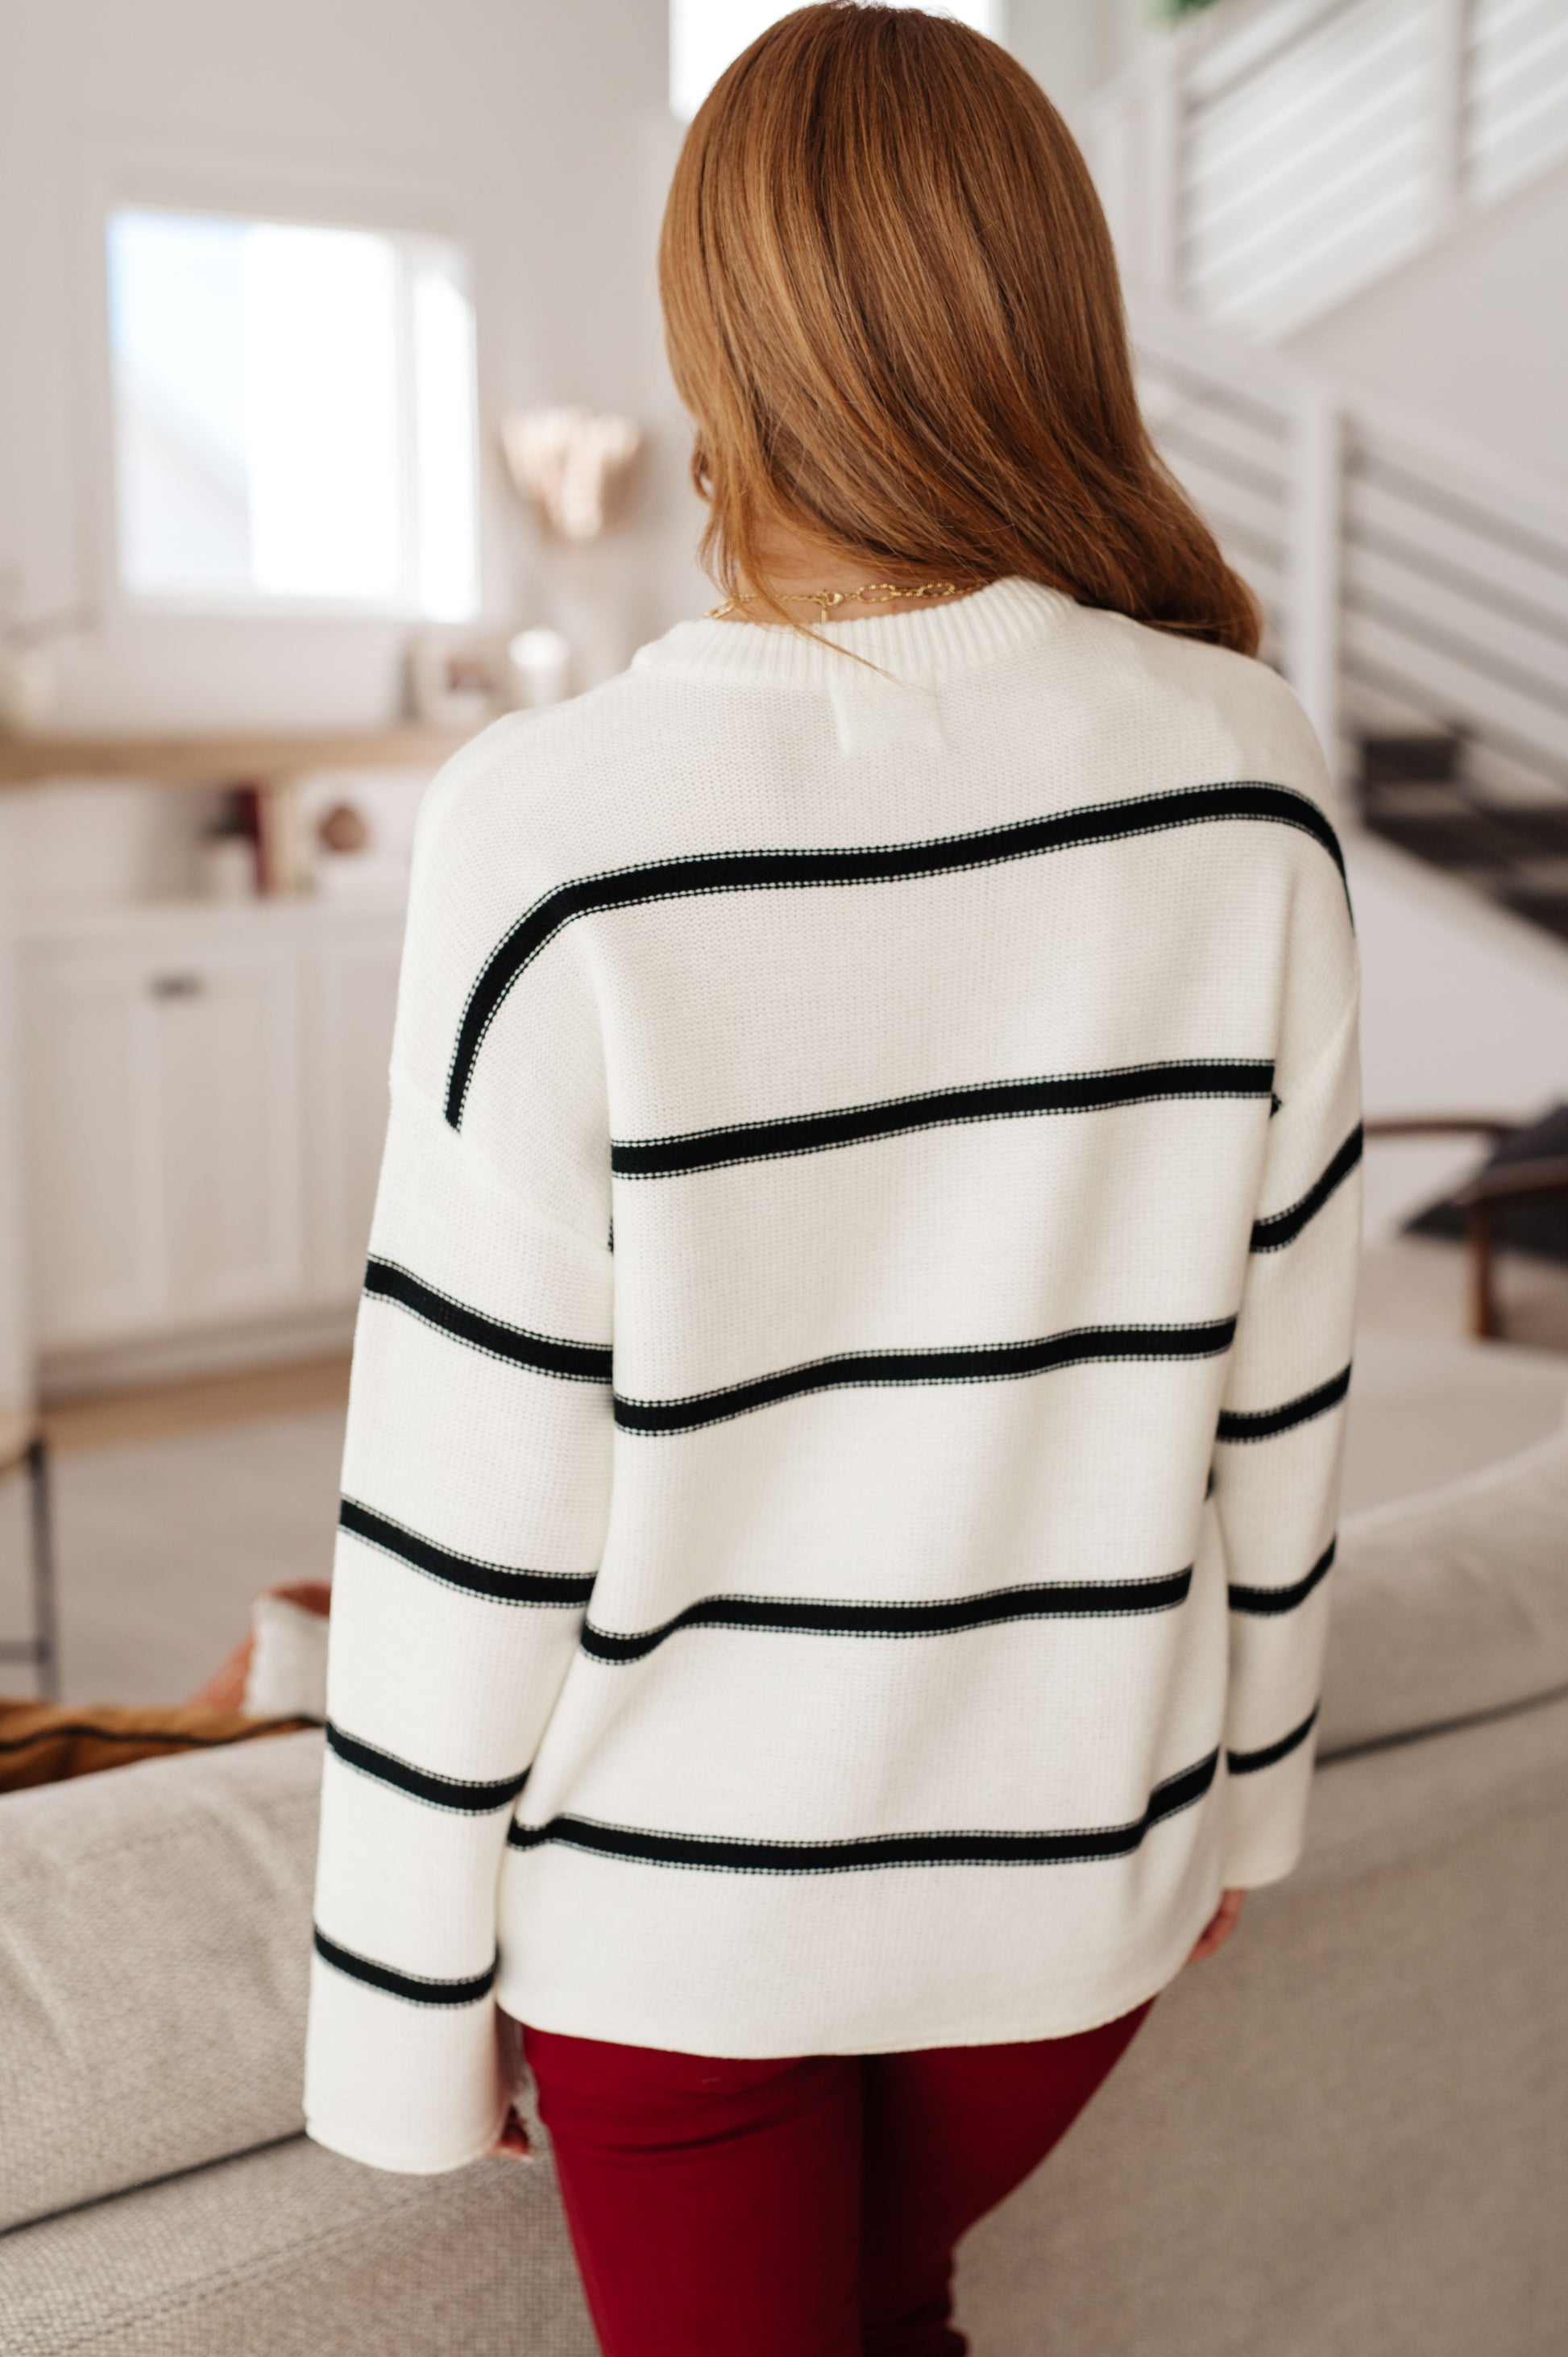 More or Less Striped Sweater - Southern Divas Boutique